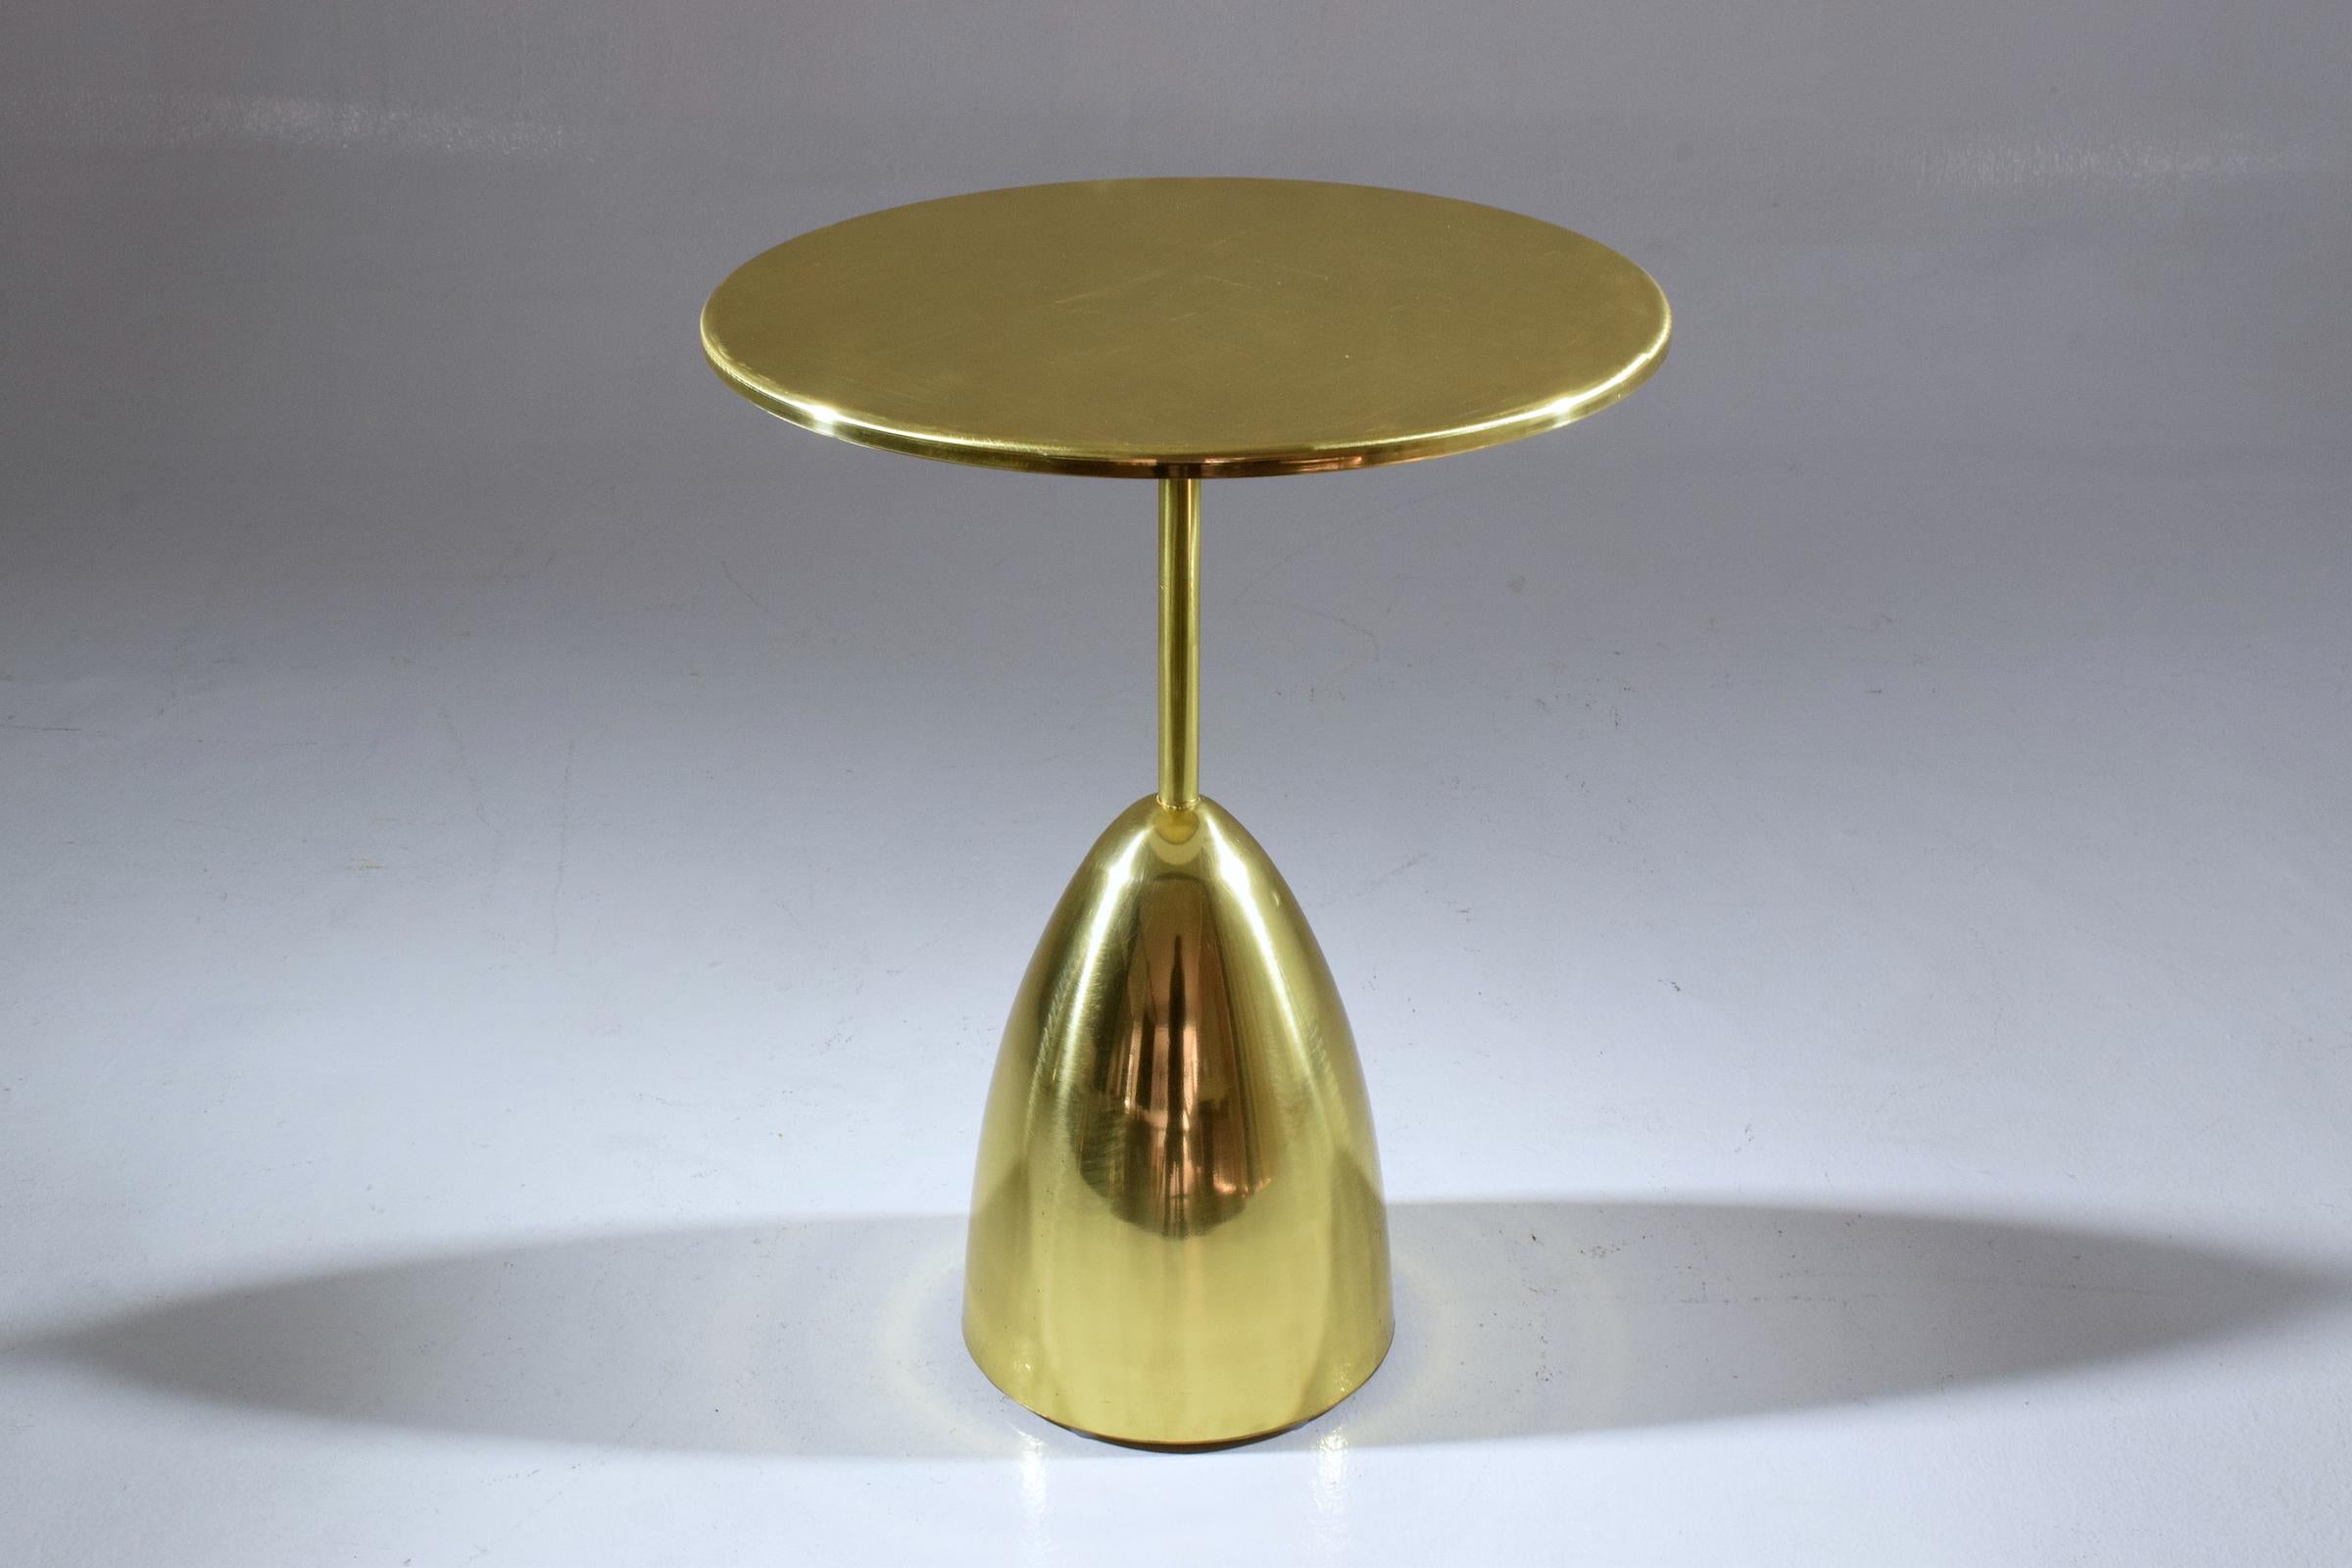  Pair of Or-Ora handcrafted brass side tables by Jonathan Amar Studio  For Sale 3